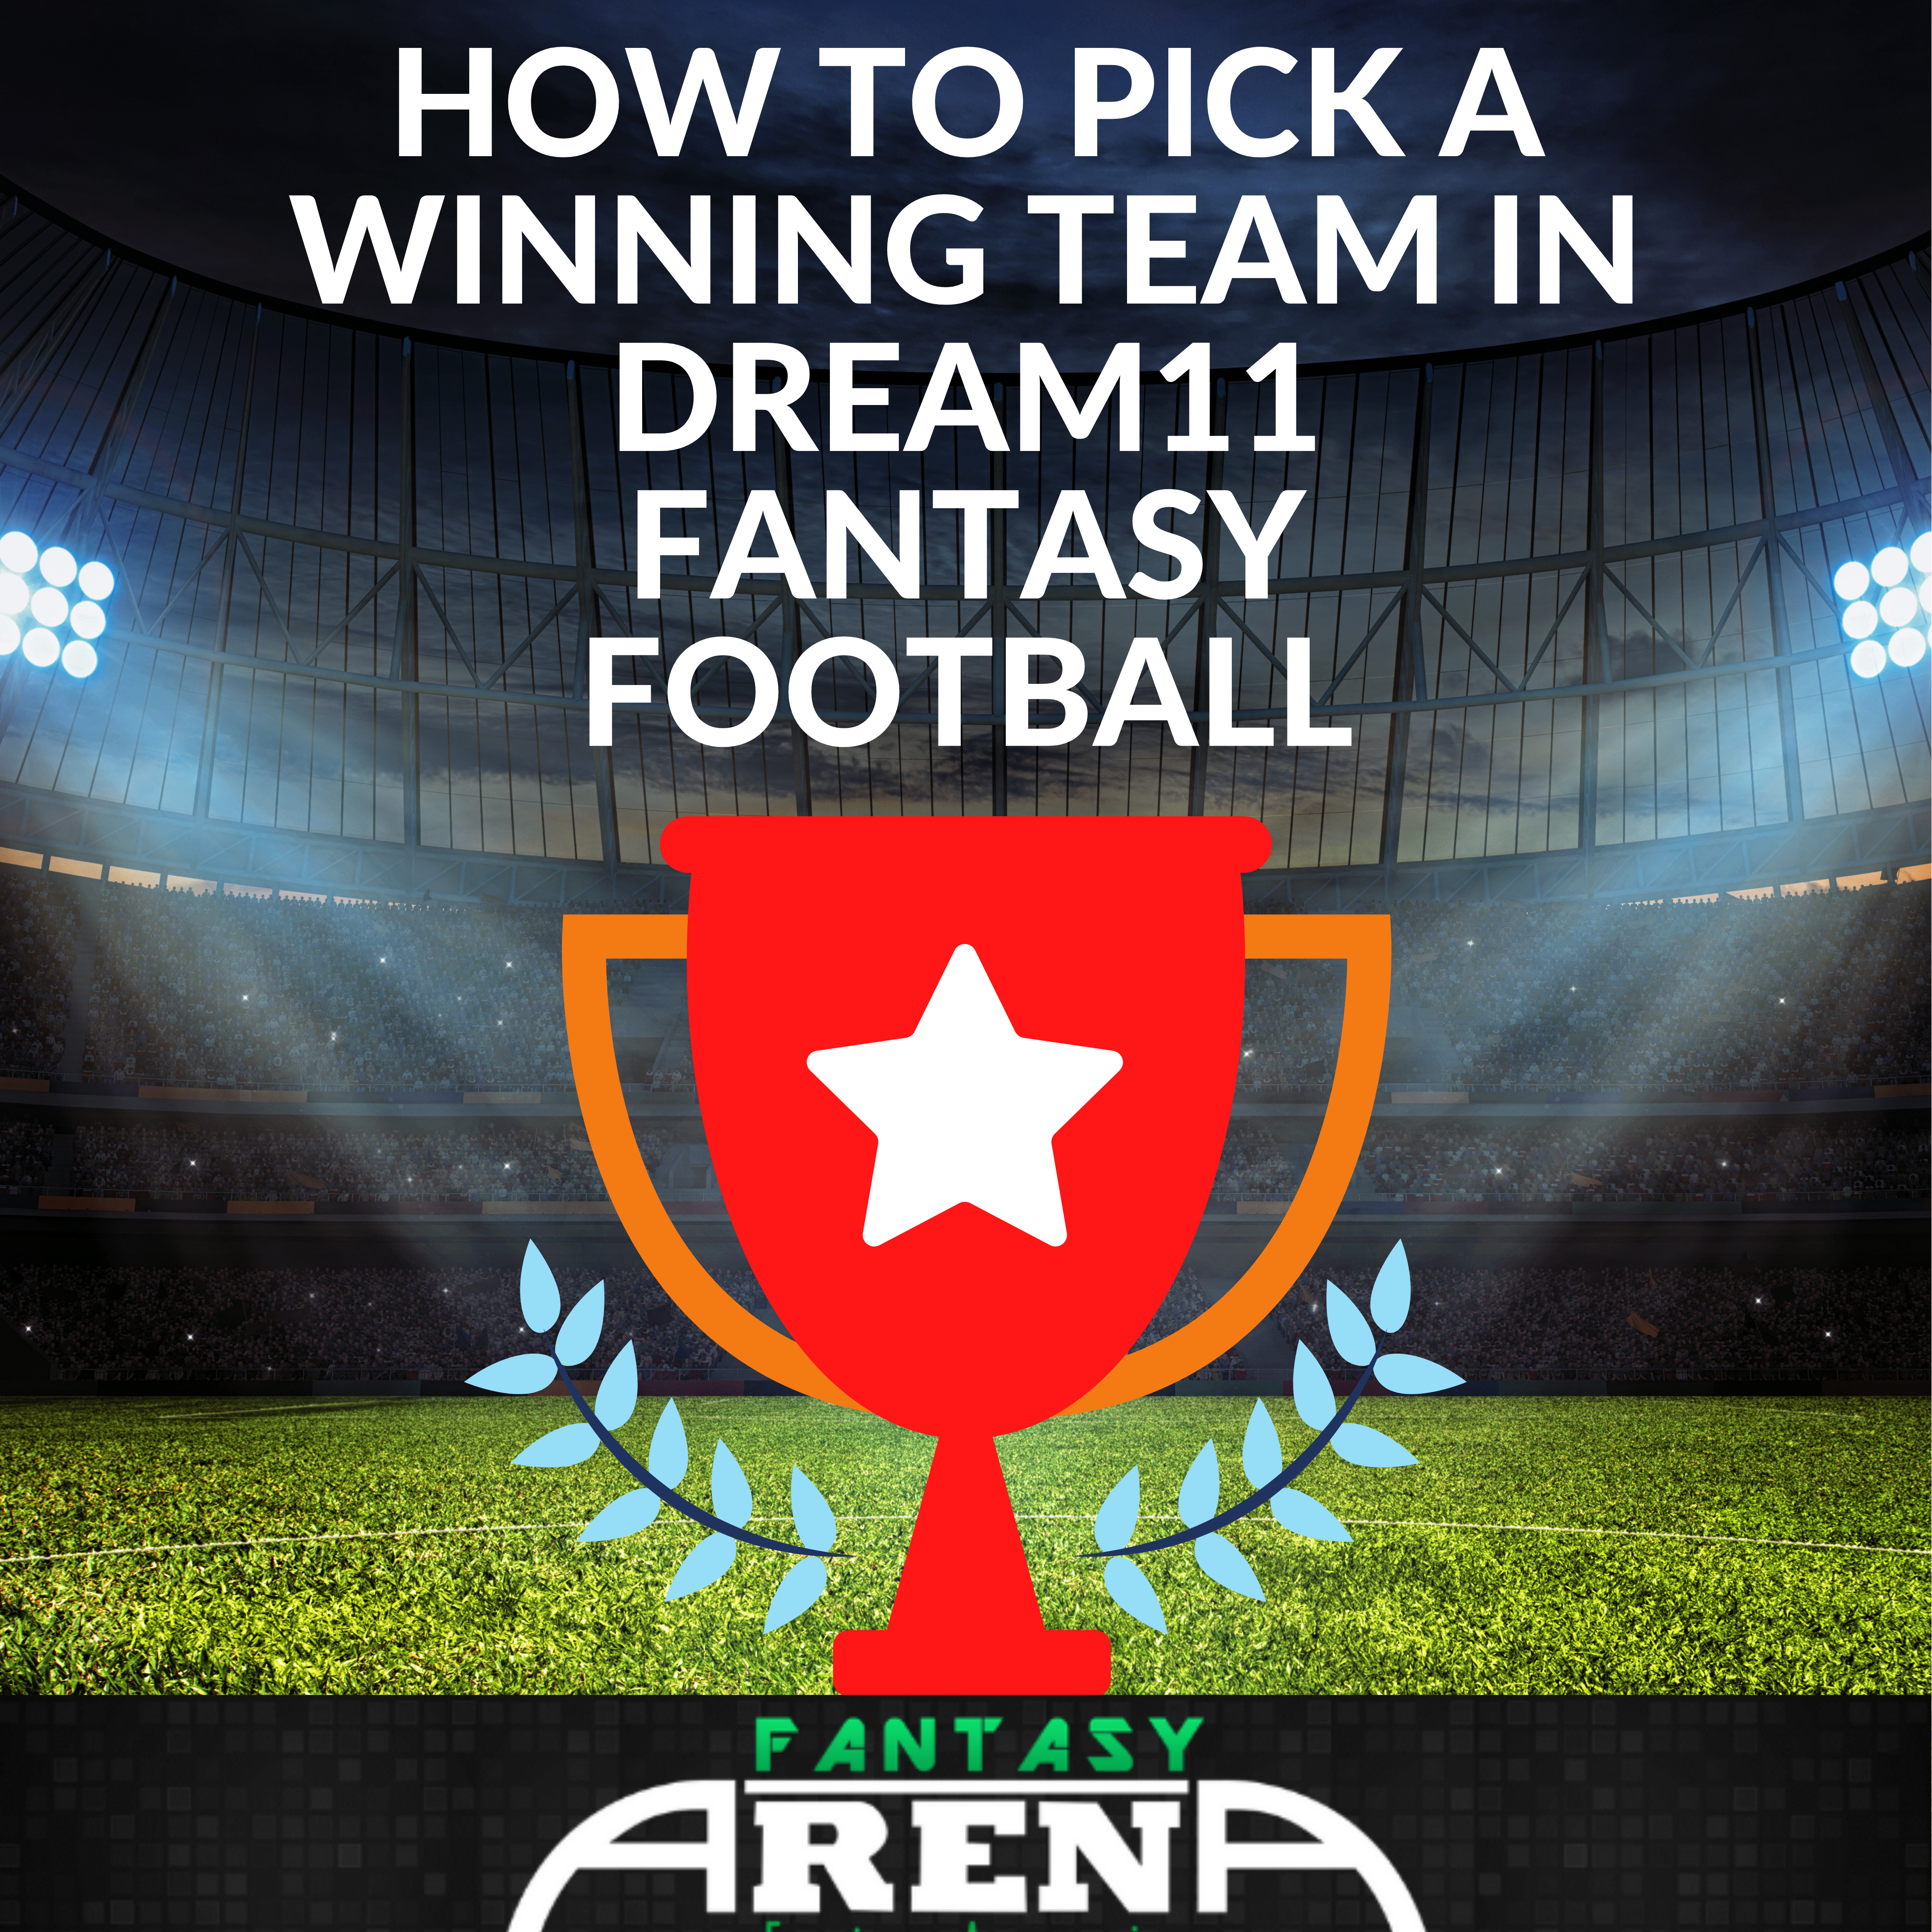 How to Pick a Winning Team in Dream11 Fantasy Football